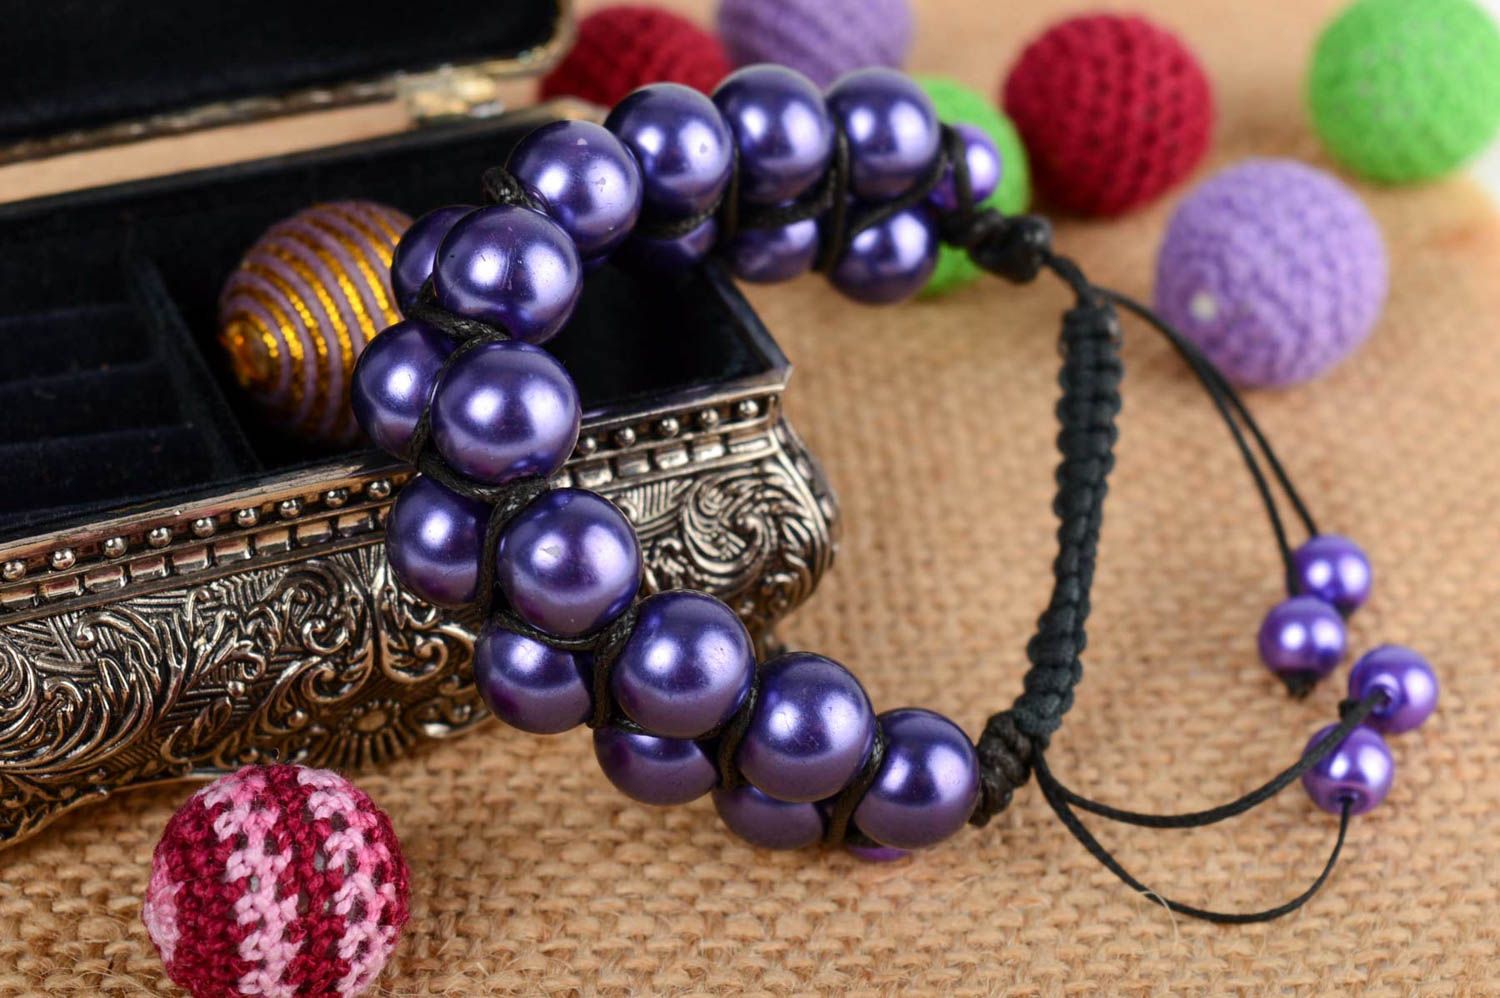 Handmade purple bracelet made of ceramic pearls and lace using macrame technique photo 1